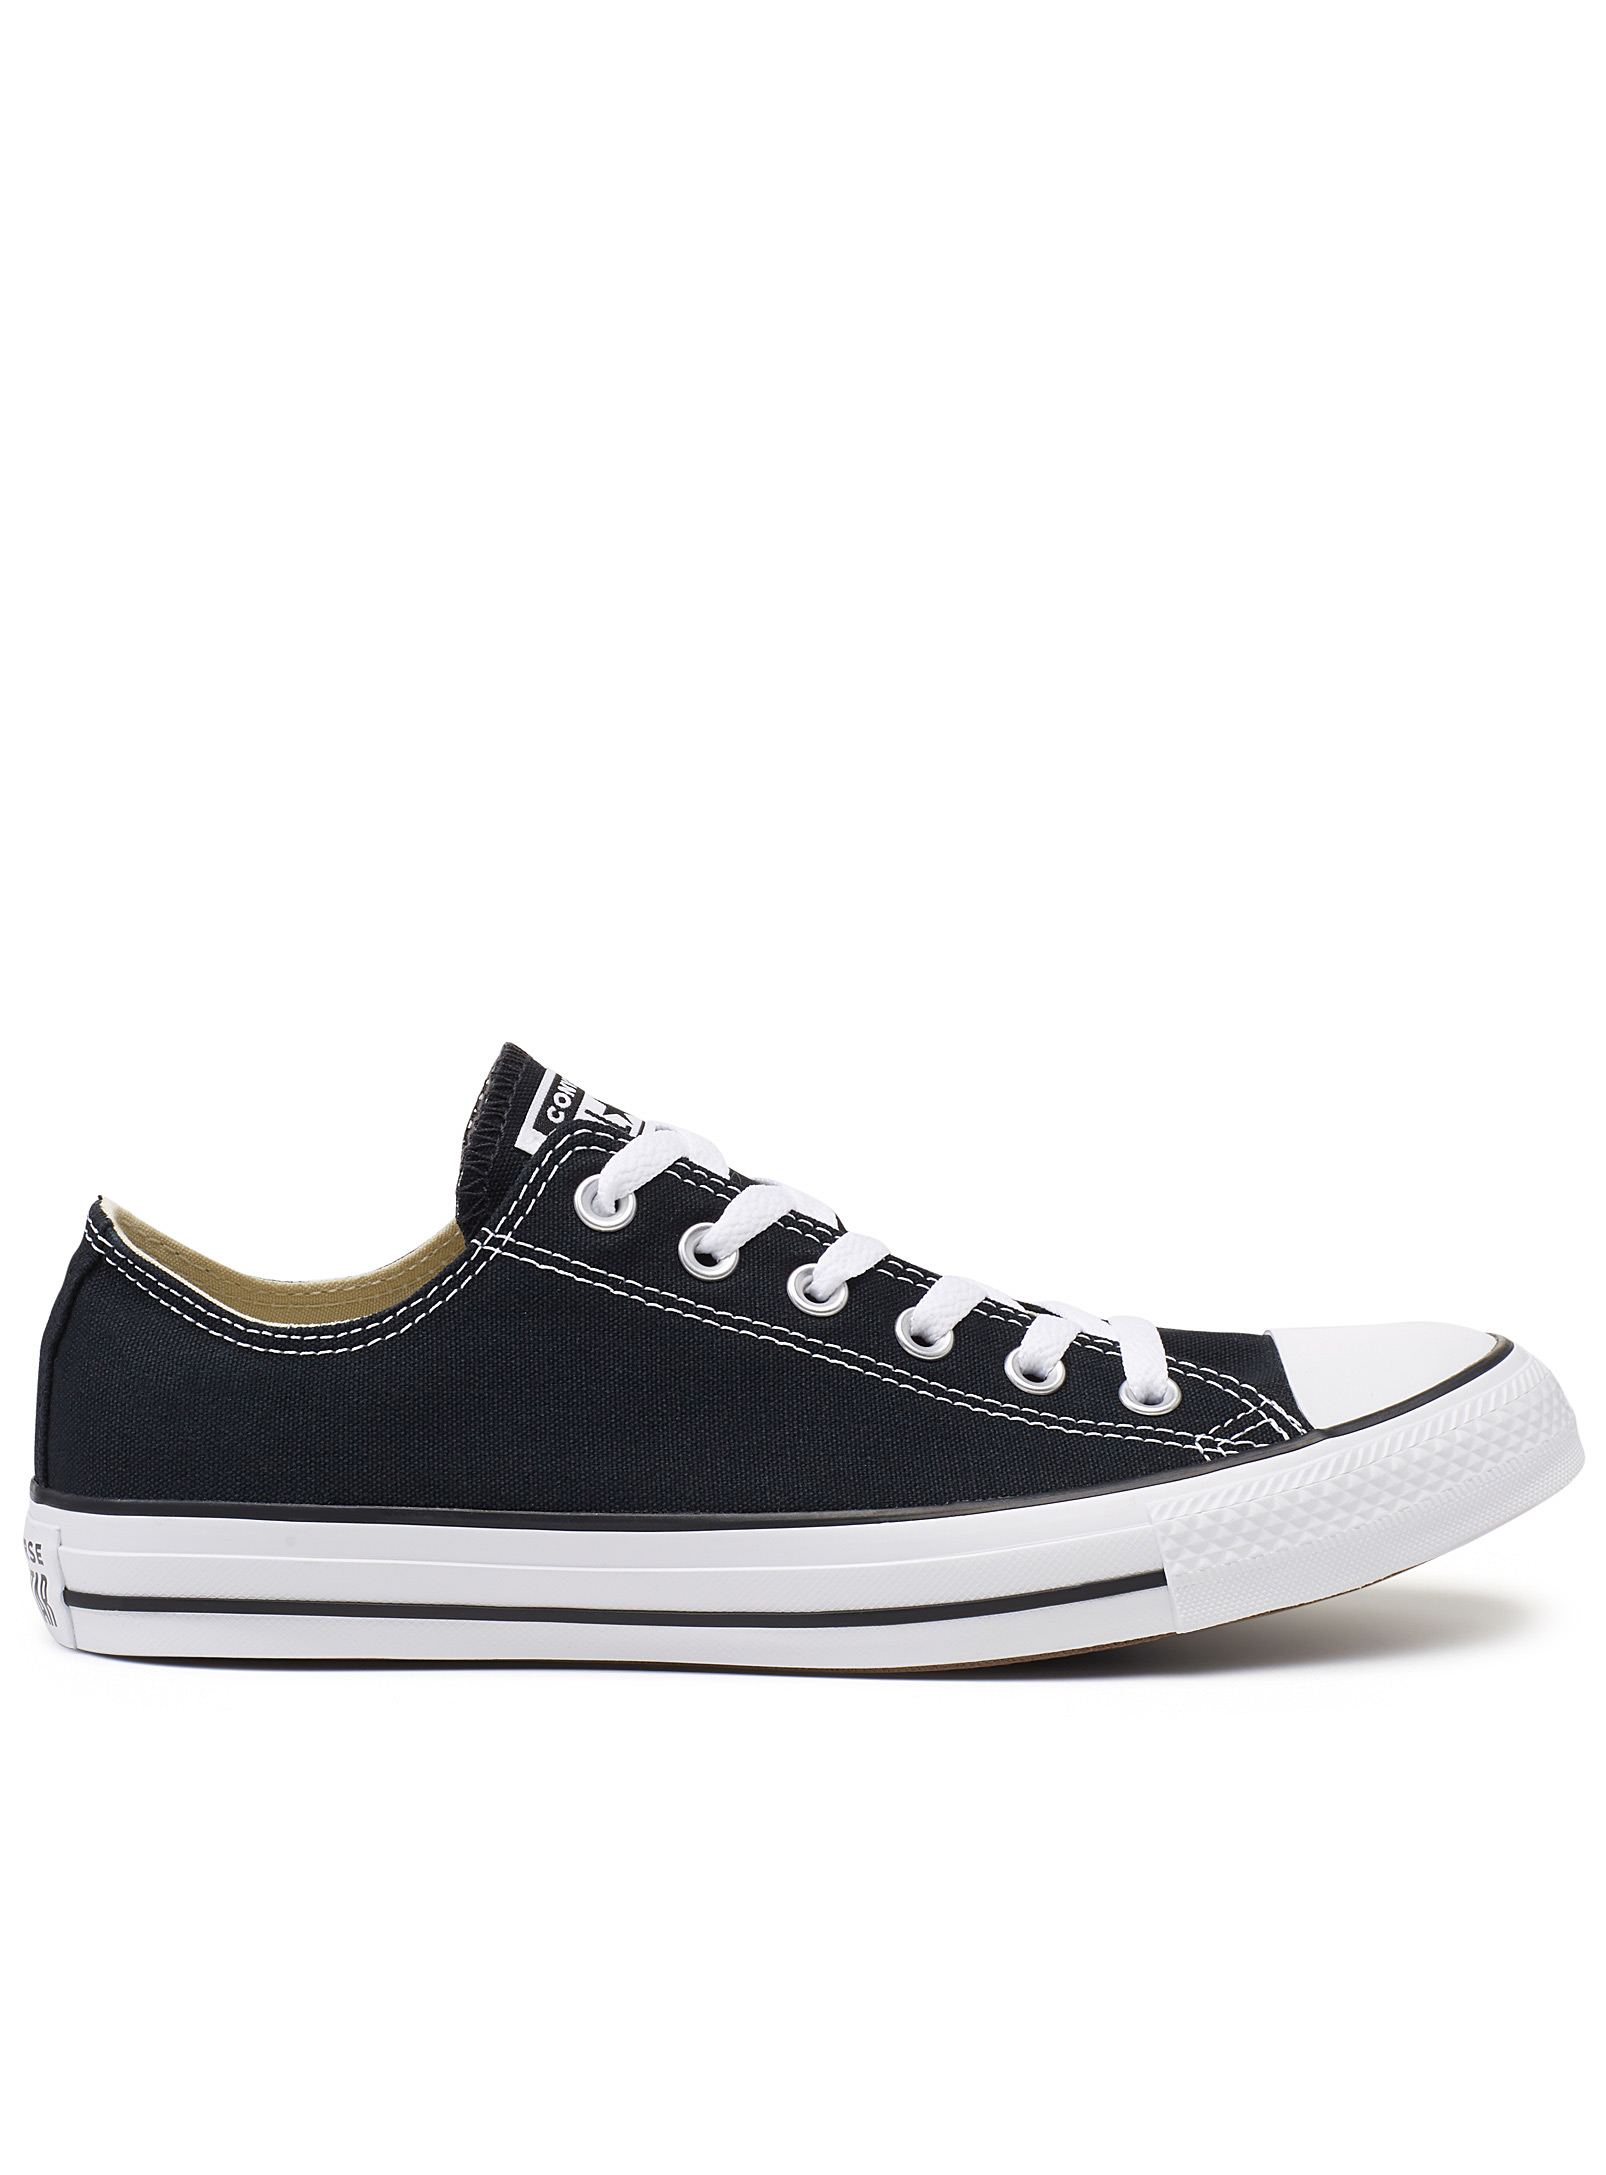 Converse - Chaussures Le Sneaker Chuck Taylor All Star Low Top noir Homme